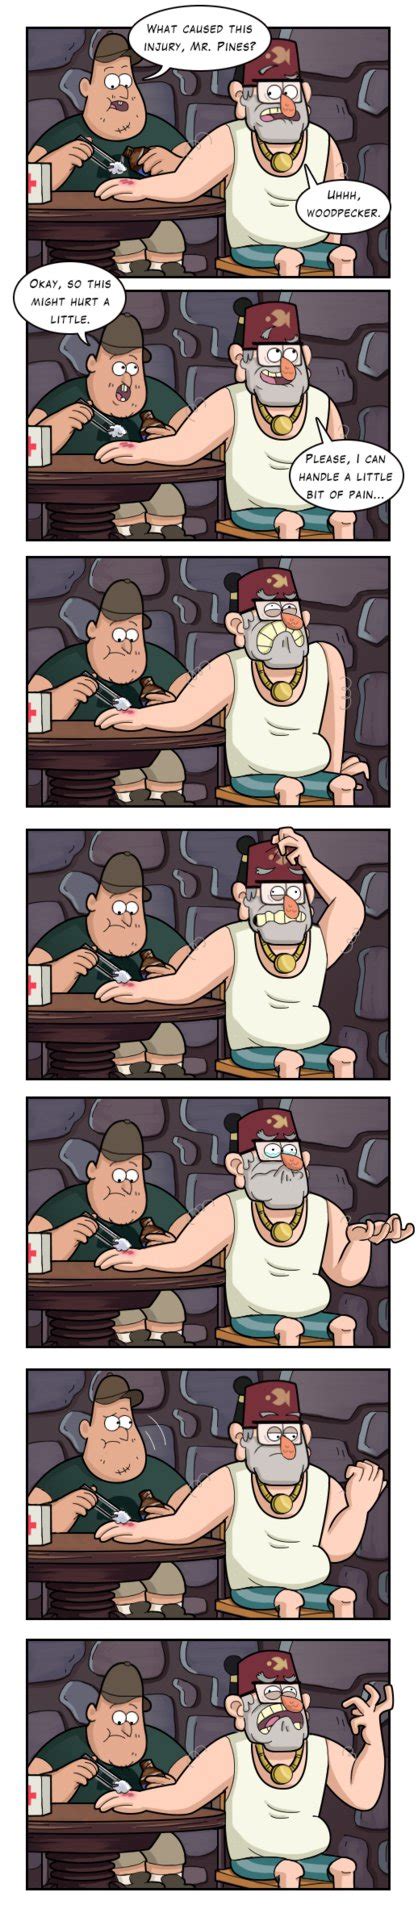 Gravity Falls Comic And Crossovers Part 3 Album On Imgur